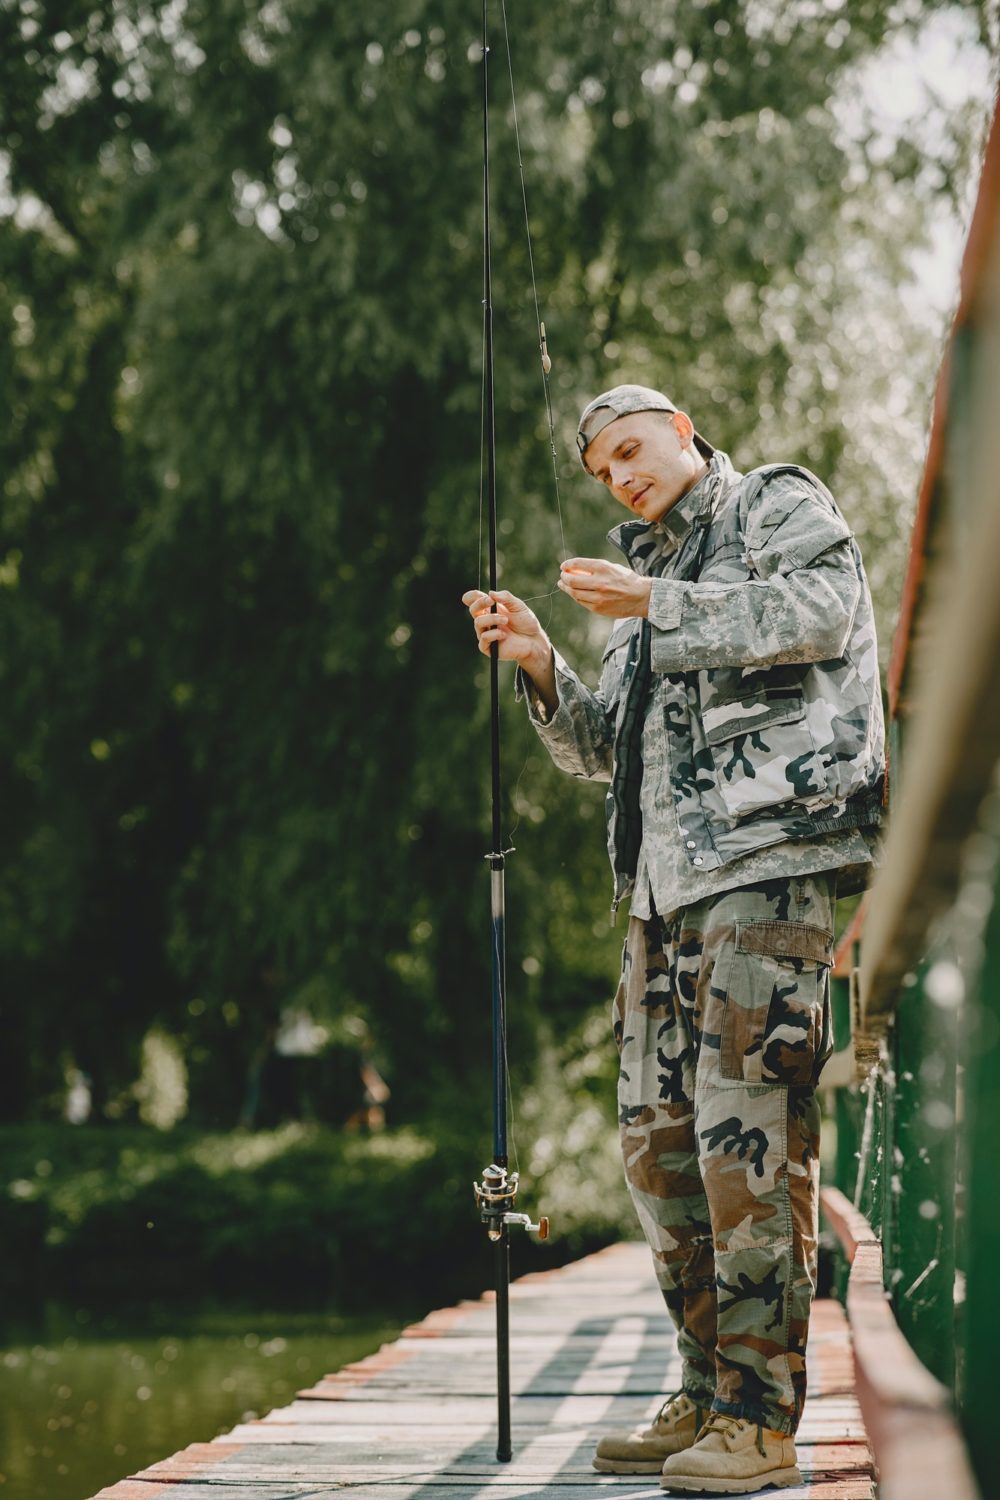 Man fishing and holds the angling rod